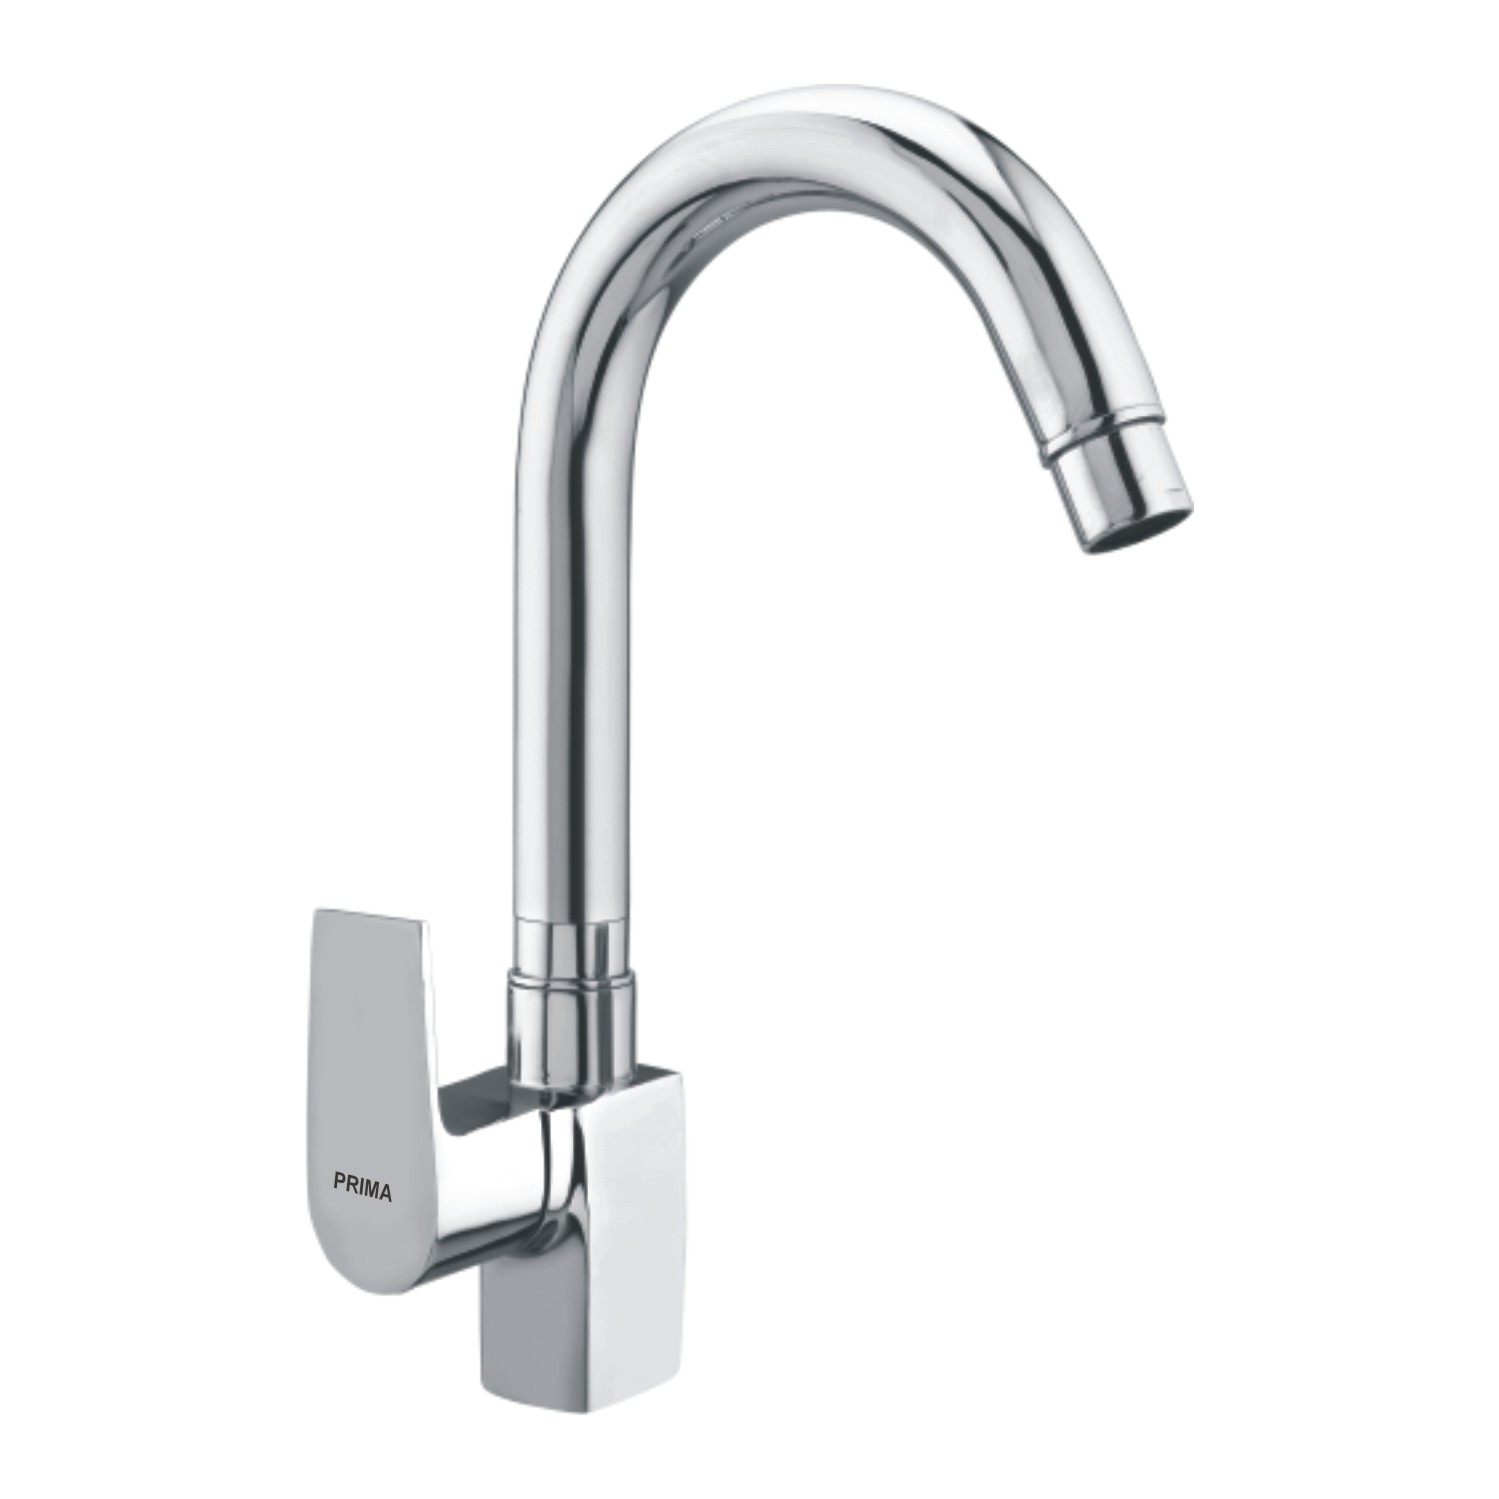 C.P Single Lever Sink Mixer Table Mounted